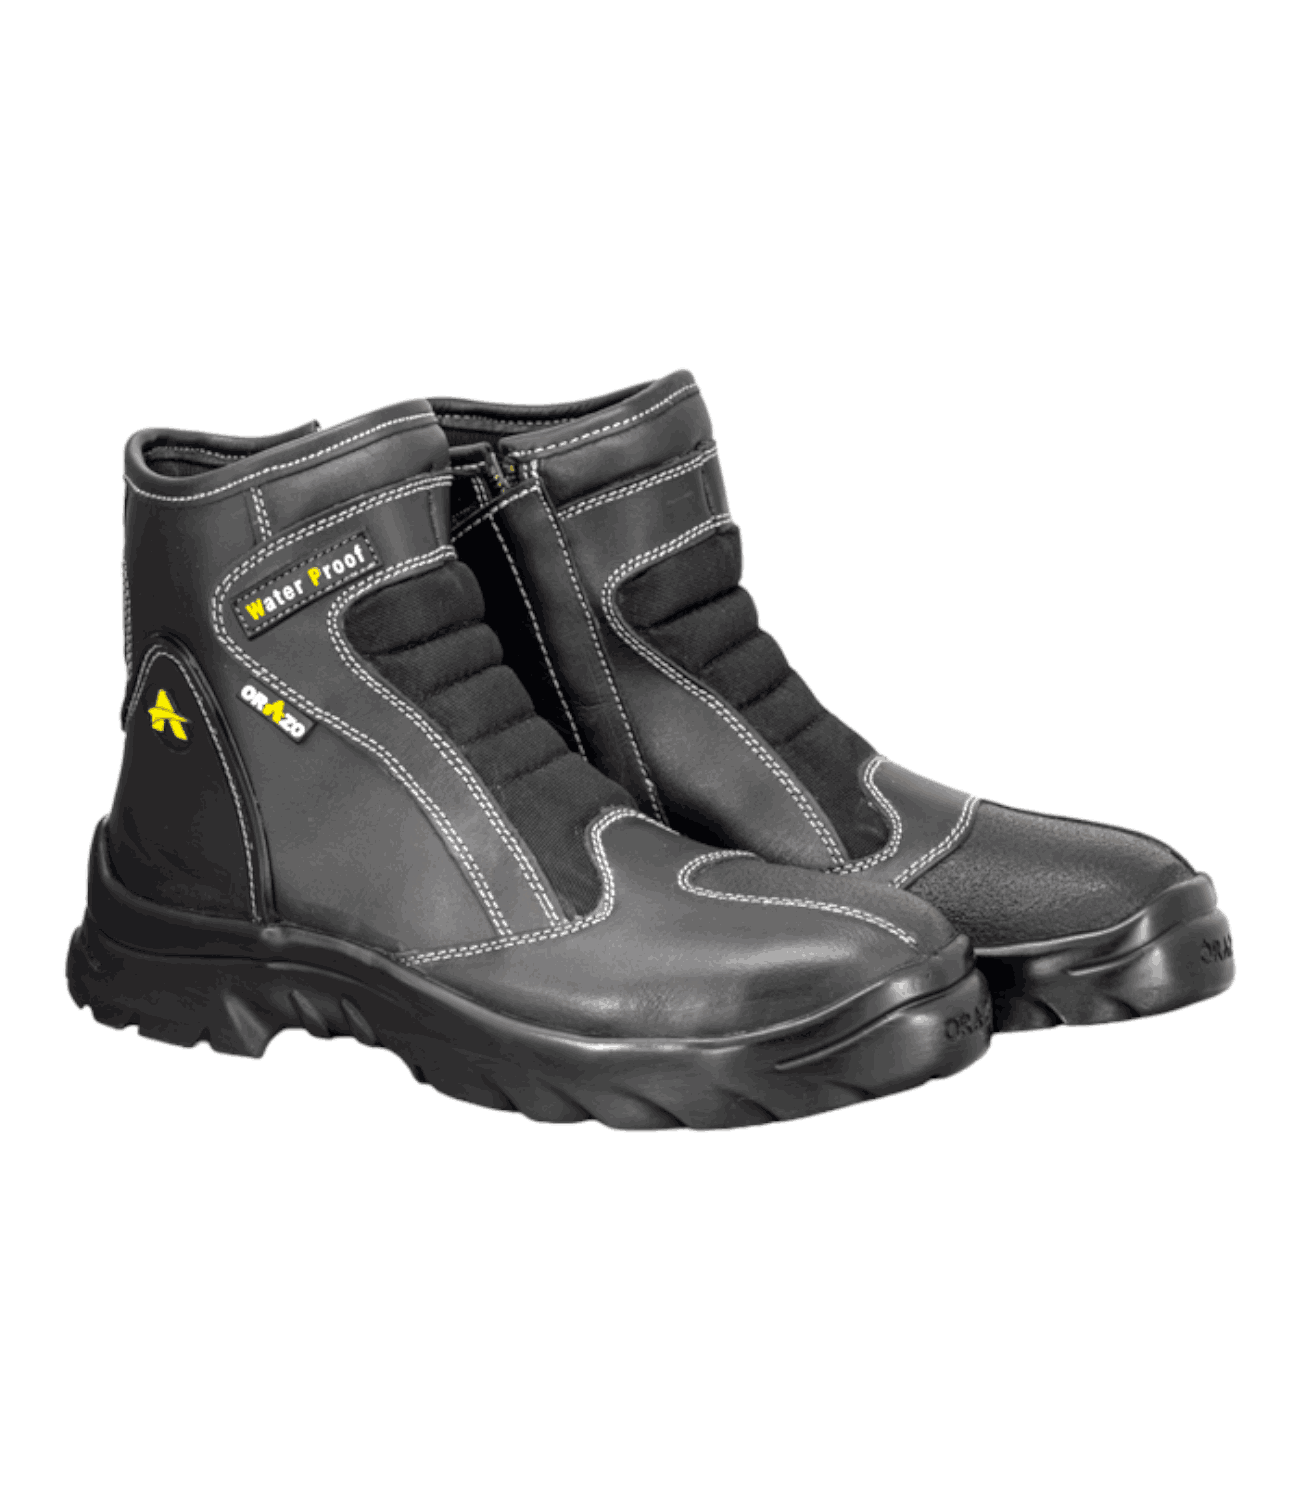 Orazo Picus Sports Zipper Waterproof Motorcycle Boots